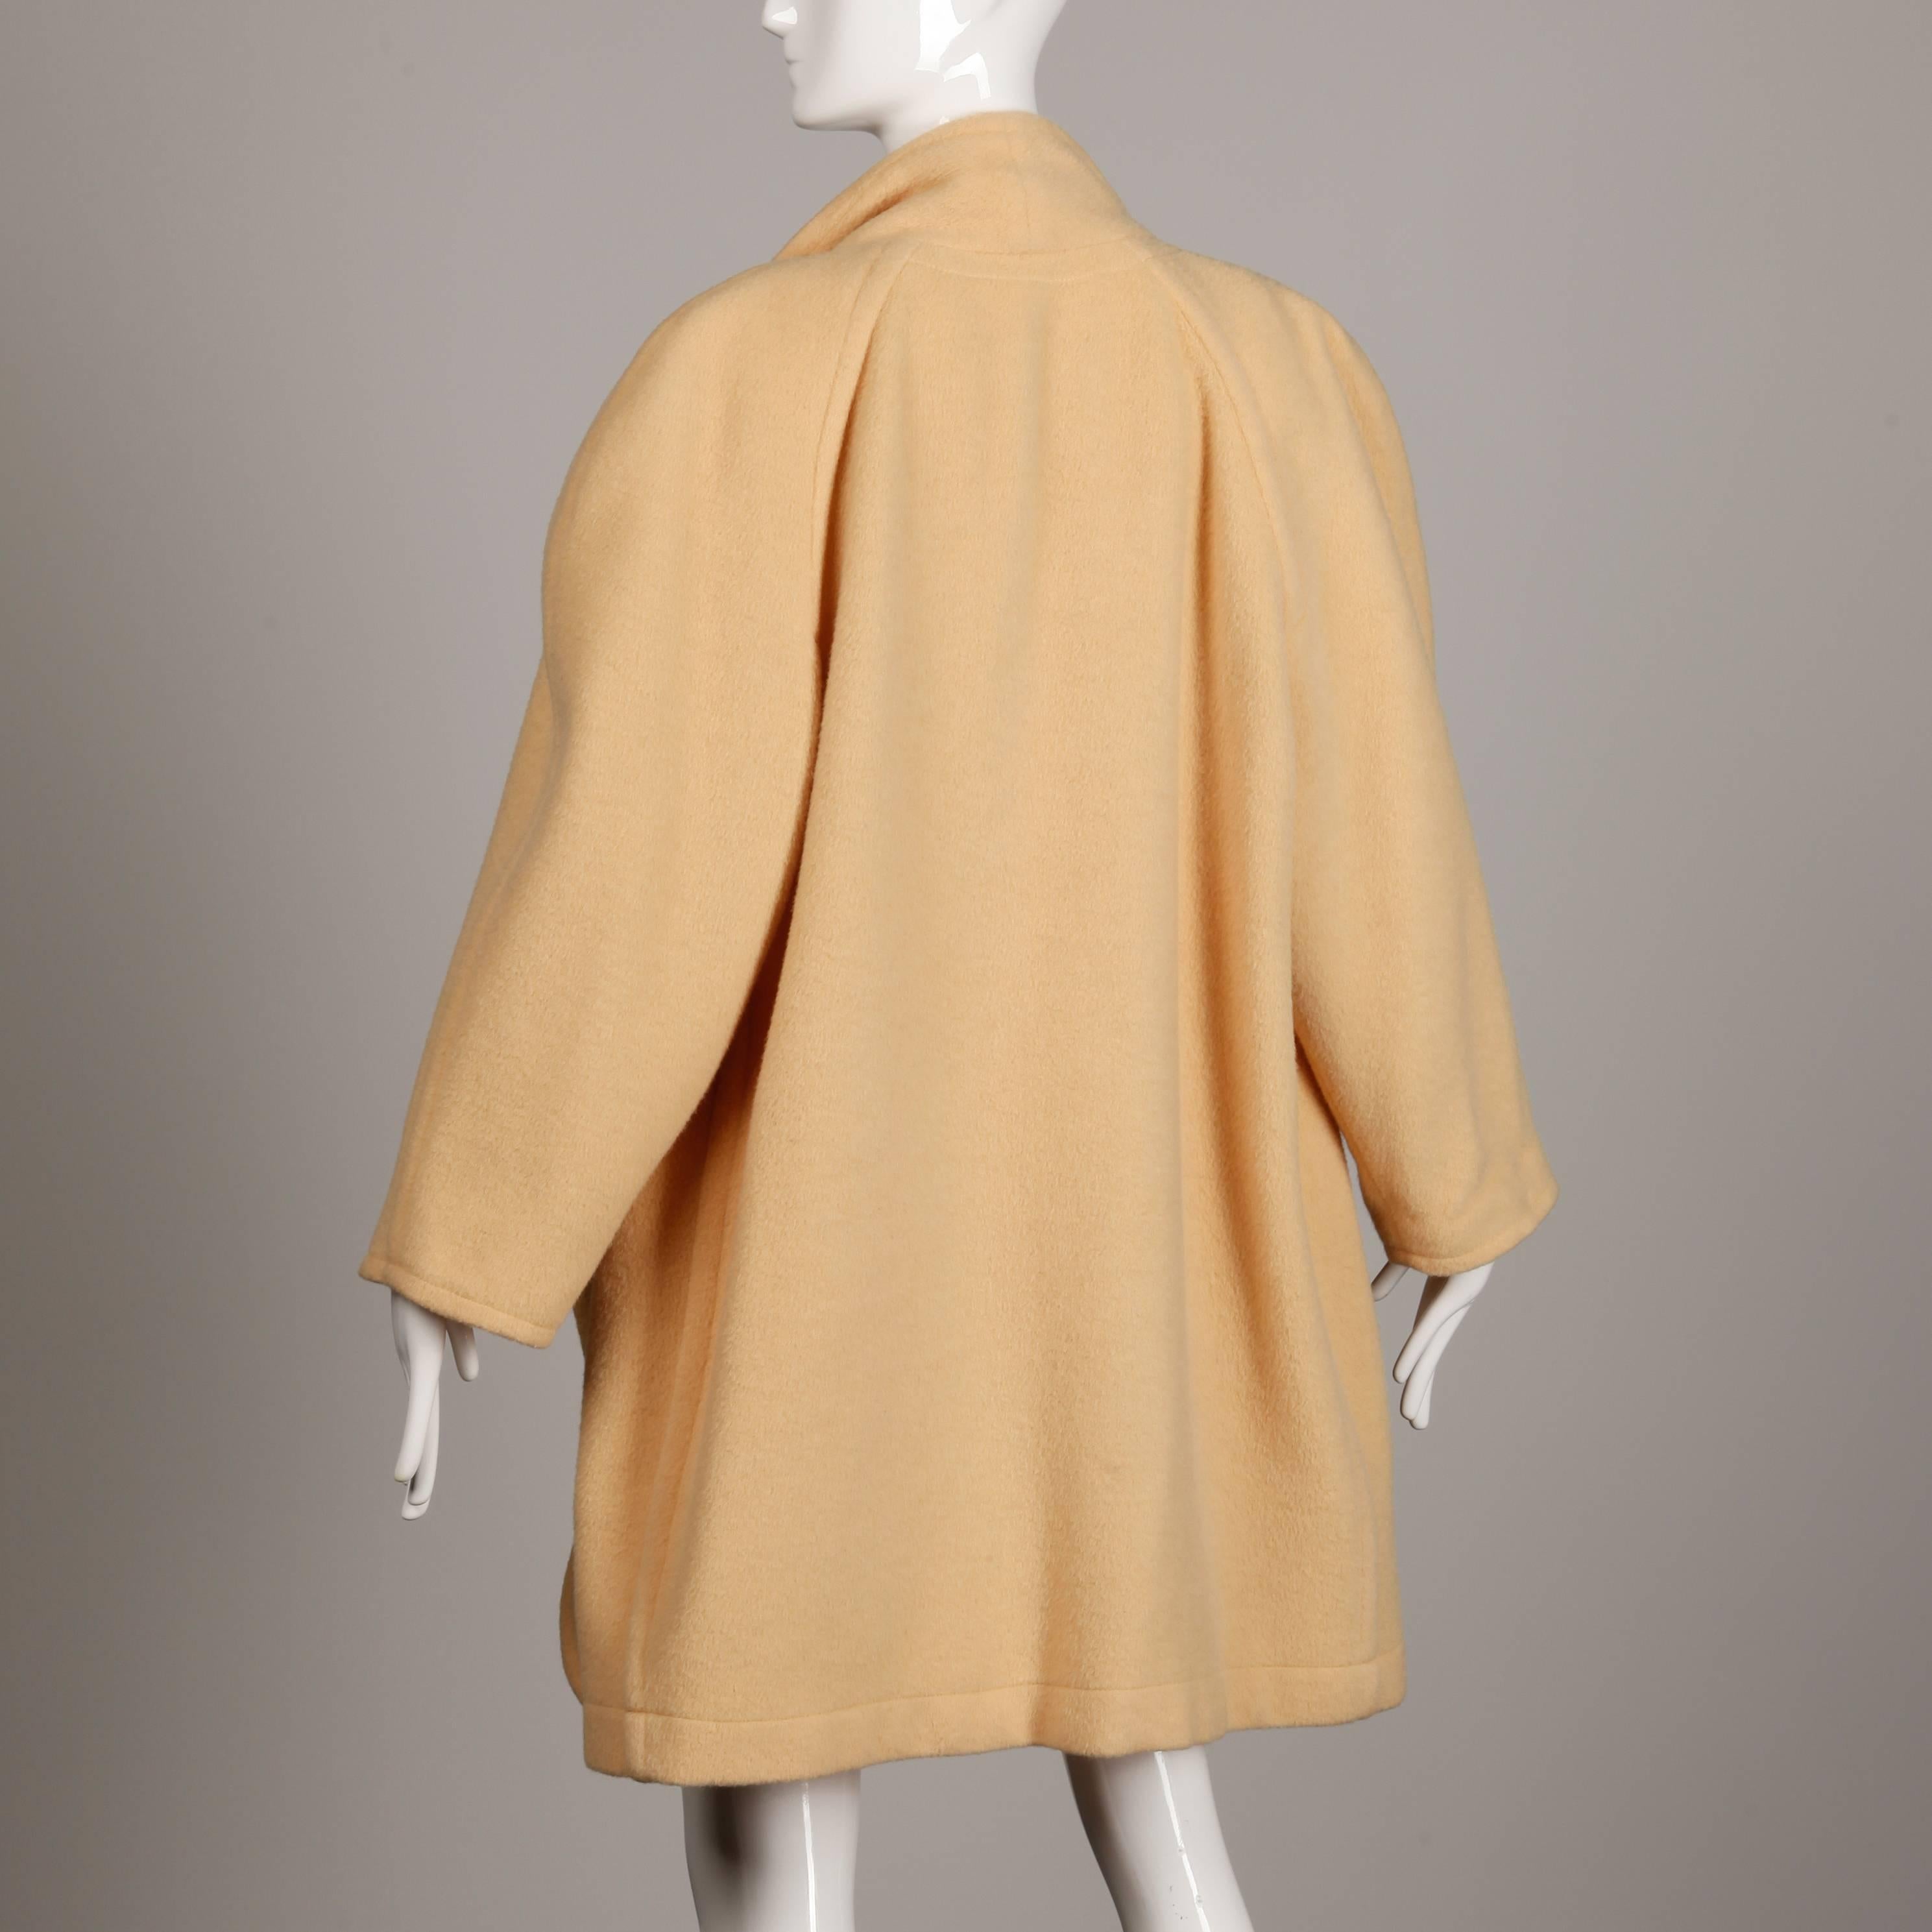 Beige Claude Montana Vintage Oversized Boxy Wool and Cashmere Coat, 1980s 